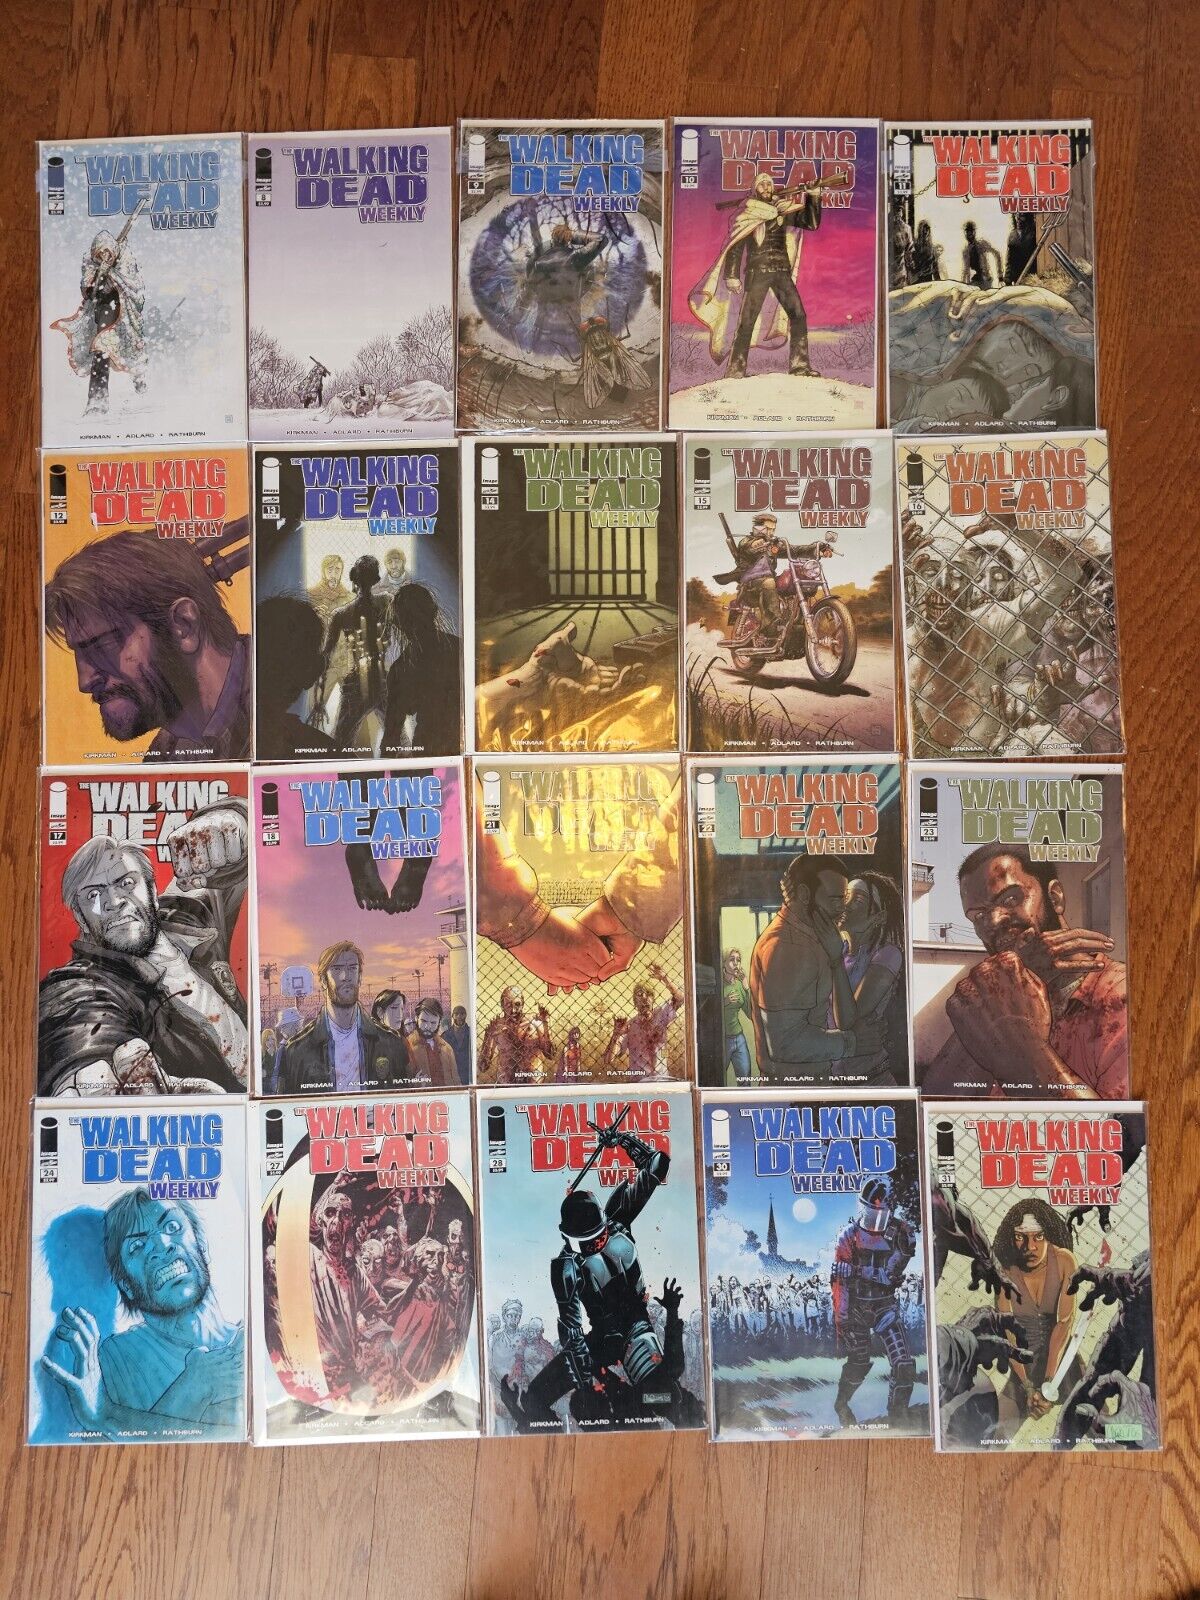 The Walking Dead Weekly #\'s 7-18, 21-24, 27, 28, 30, and 31. 20 books total. 